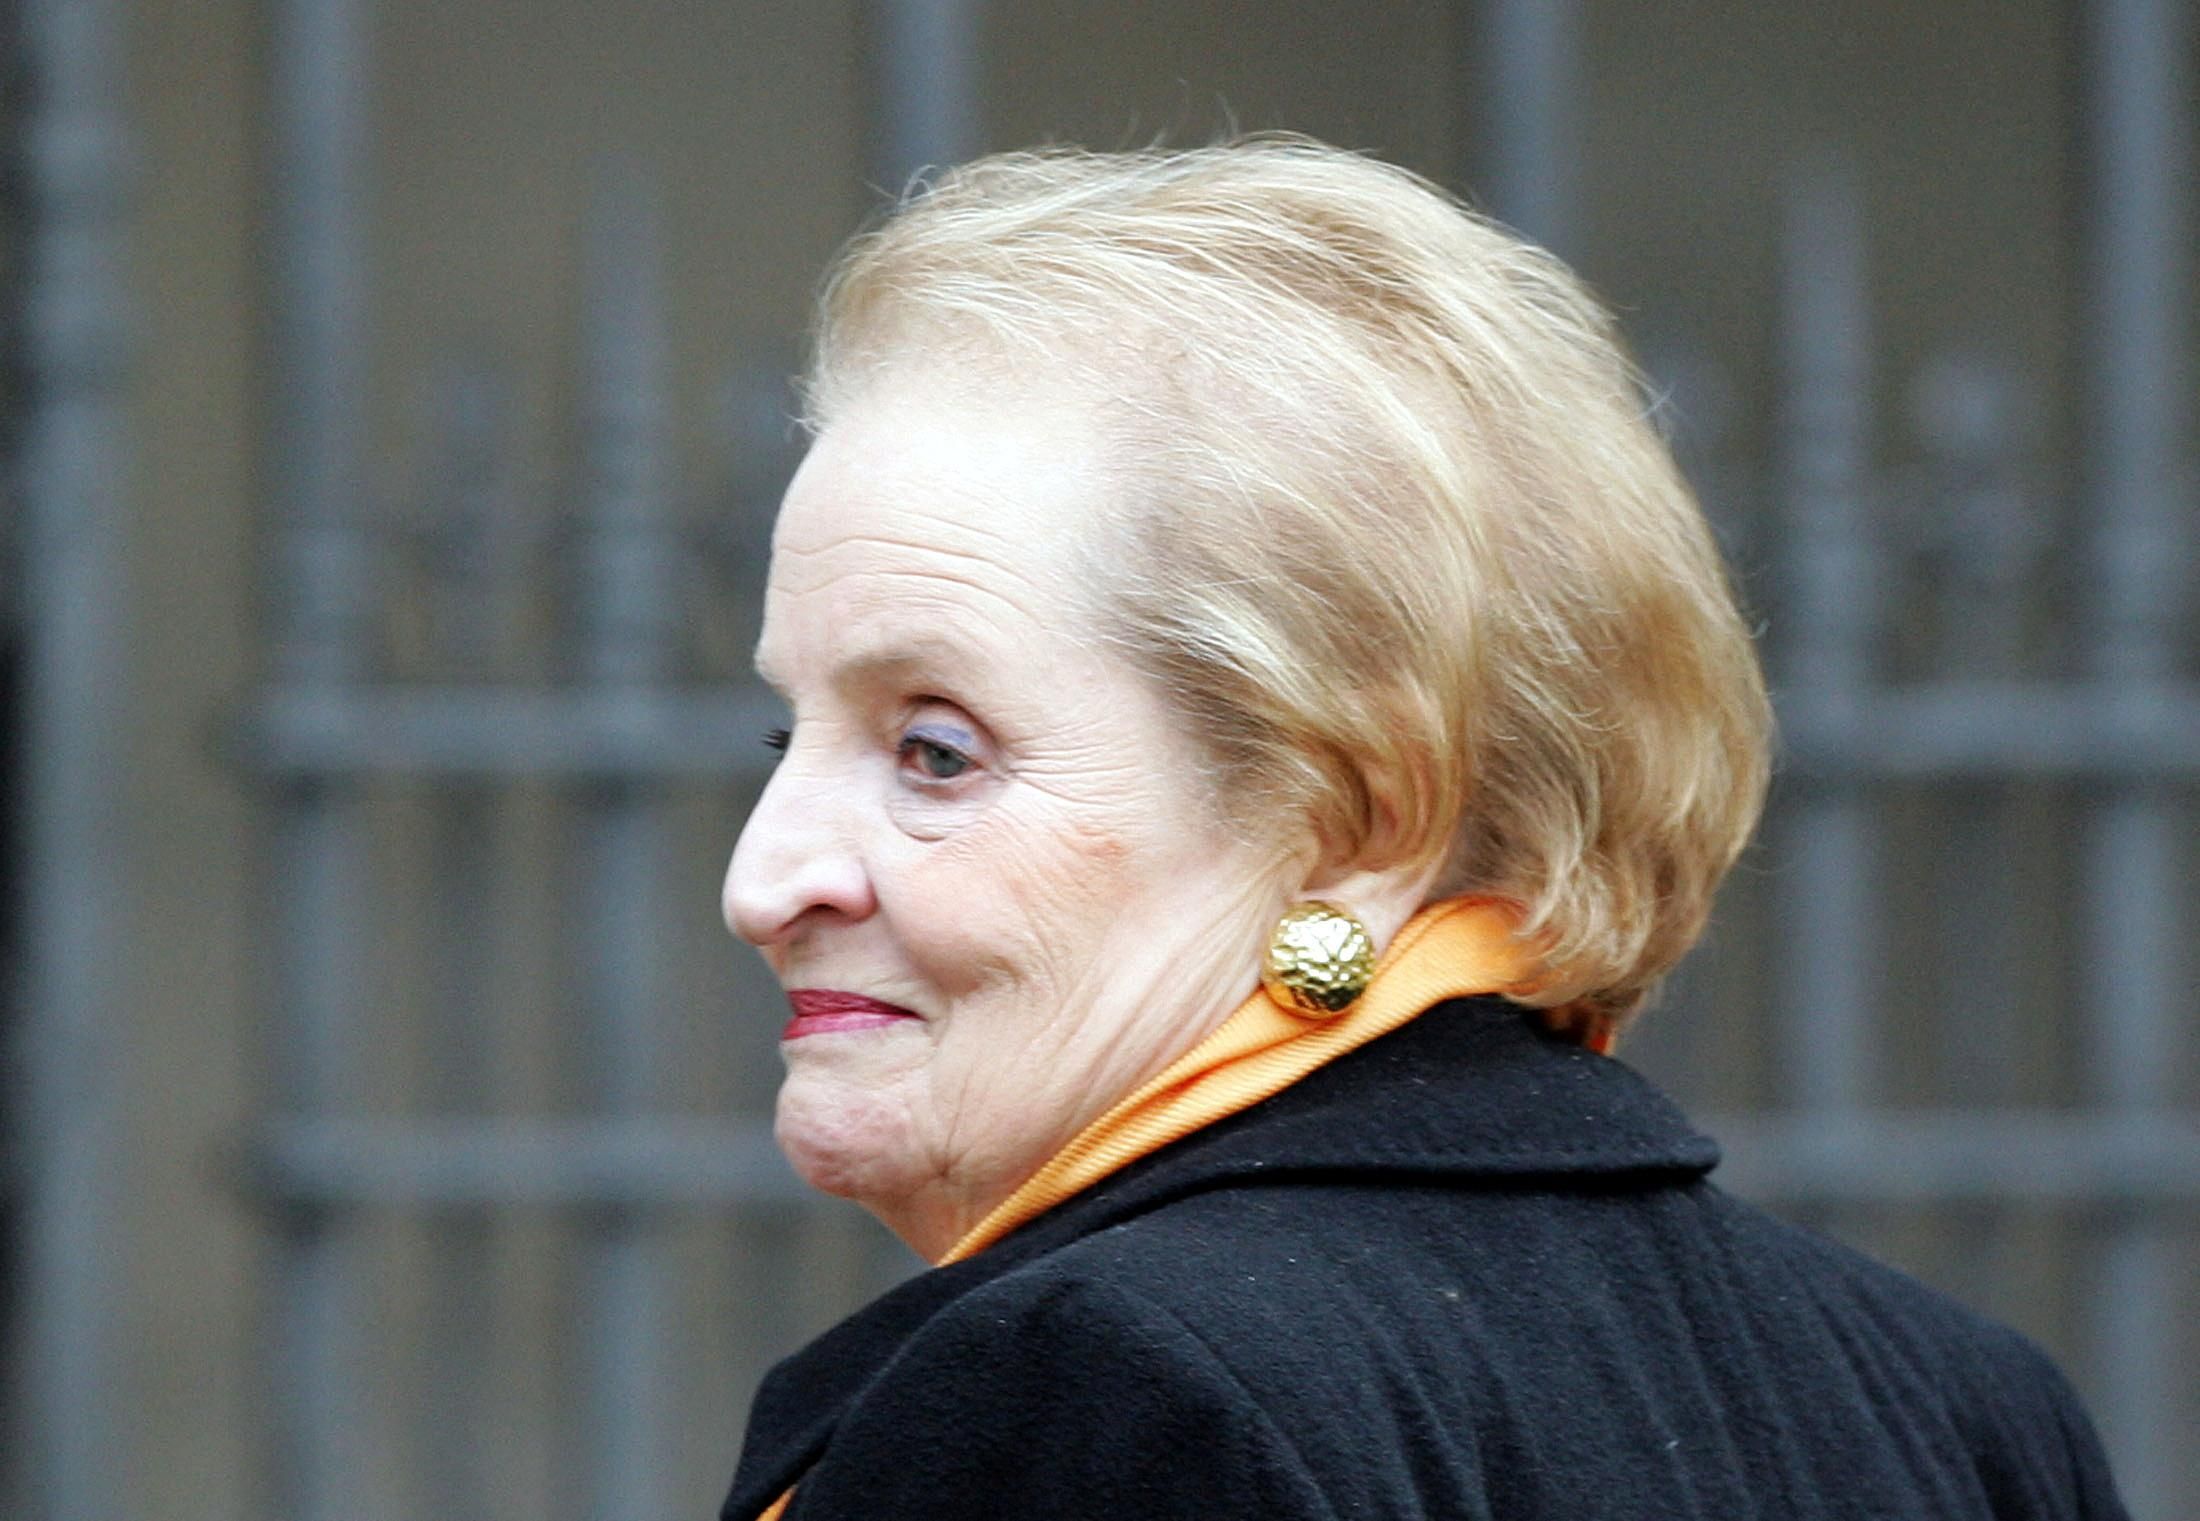 https://www.gzeromedia.com/media-library/less-than-p-greater-than-former-sec-of-state-madeleine-albright-has-died-at-age-84-less-than-p-greater-than.jpg?id=29586273